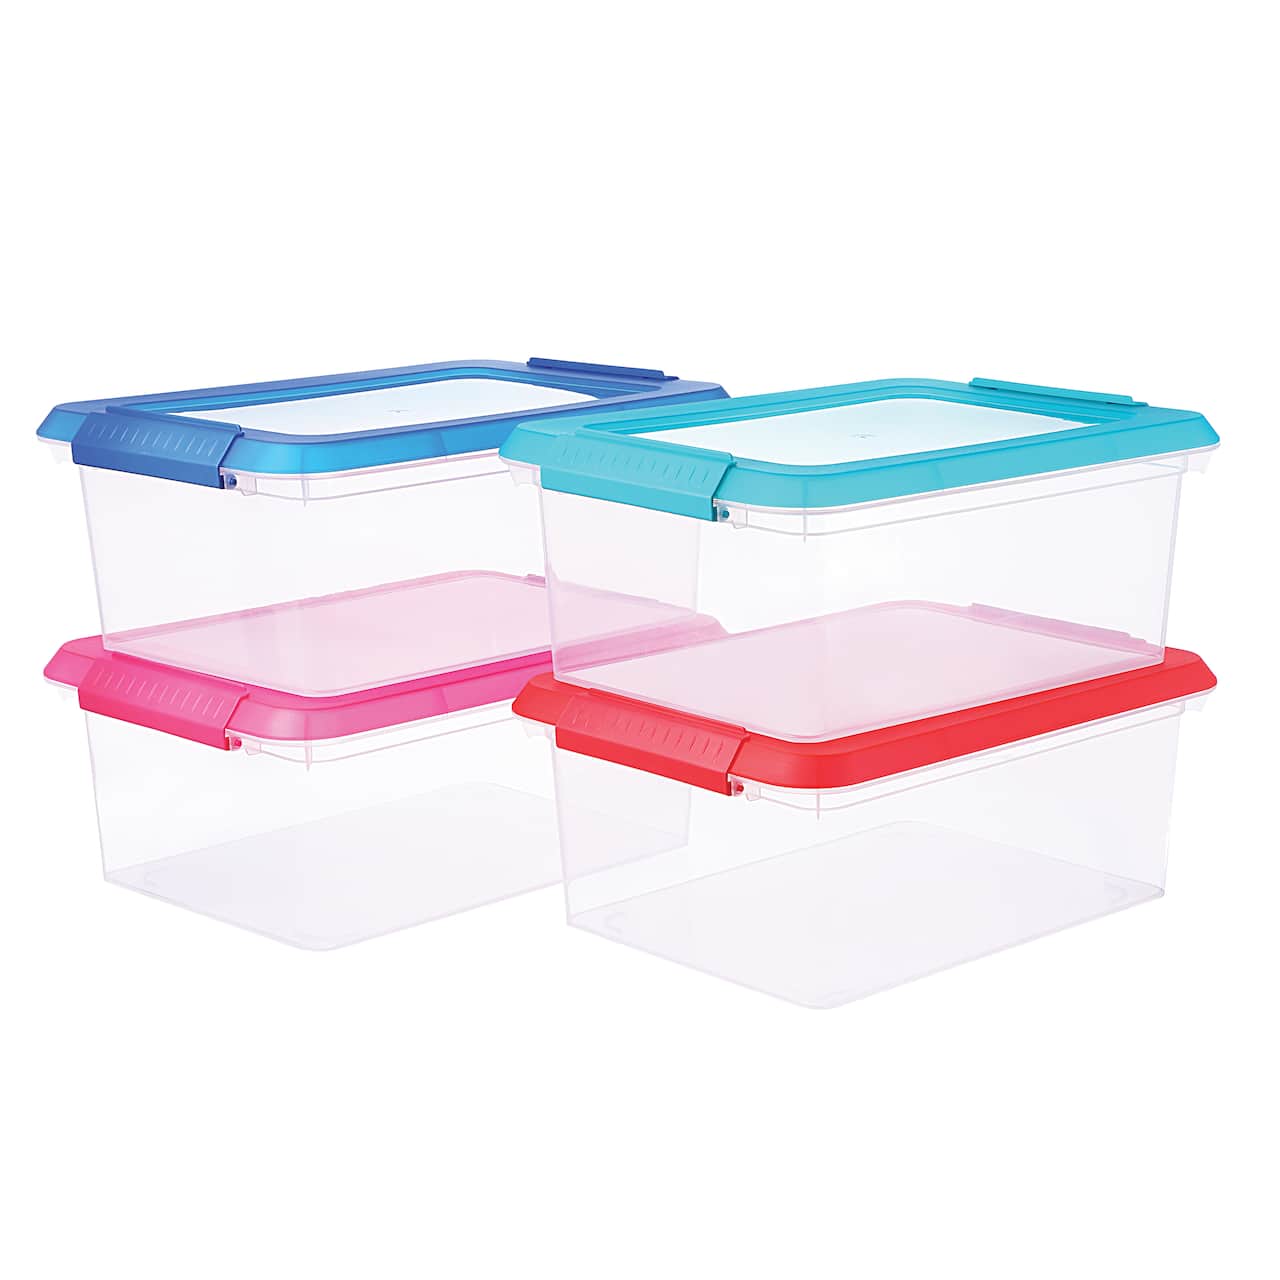 14.5qt. Storage Bins with Lids, 4ct. by Simply Tidy™